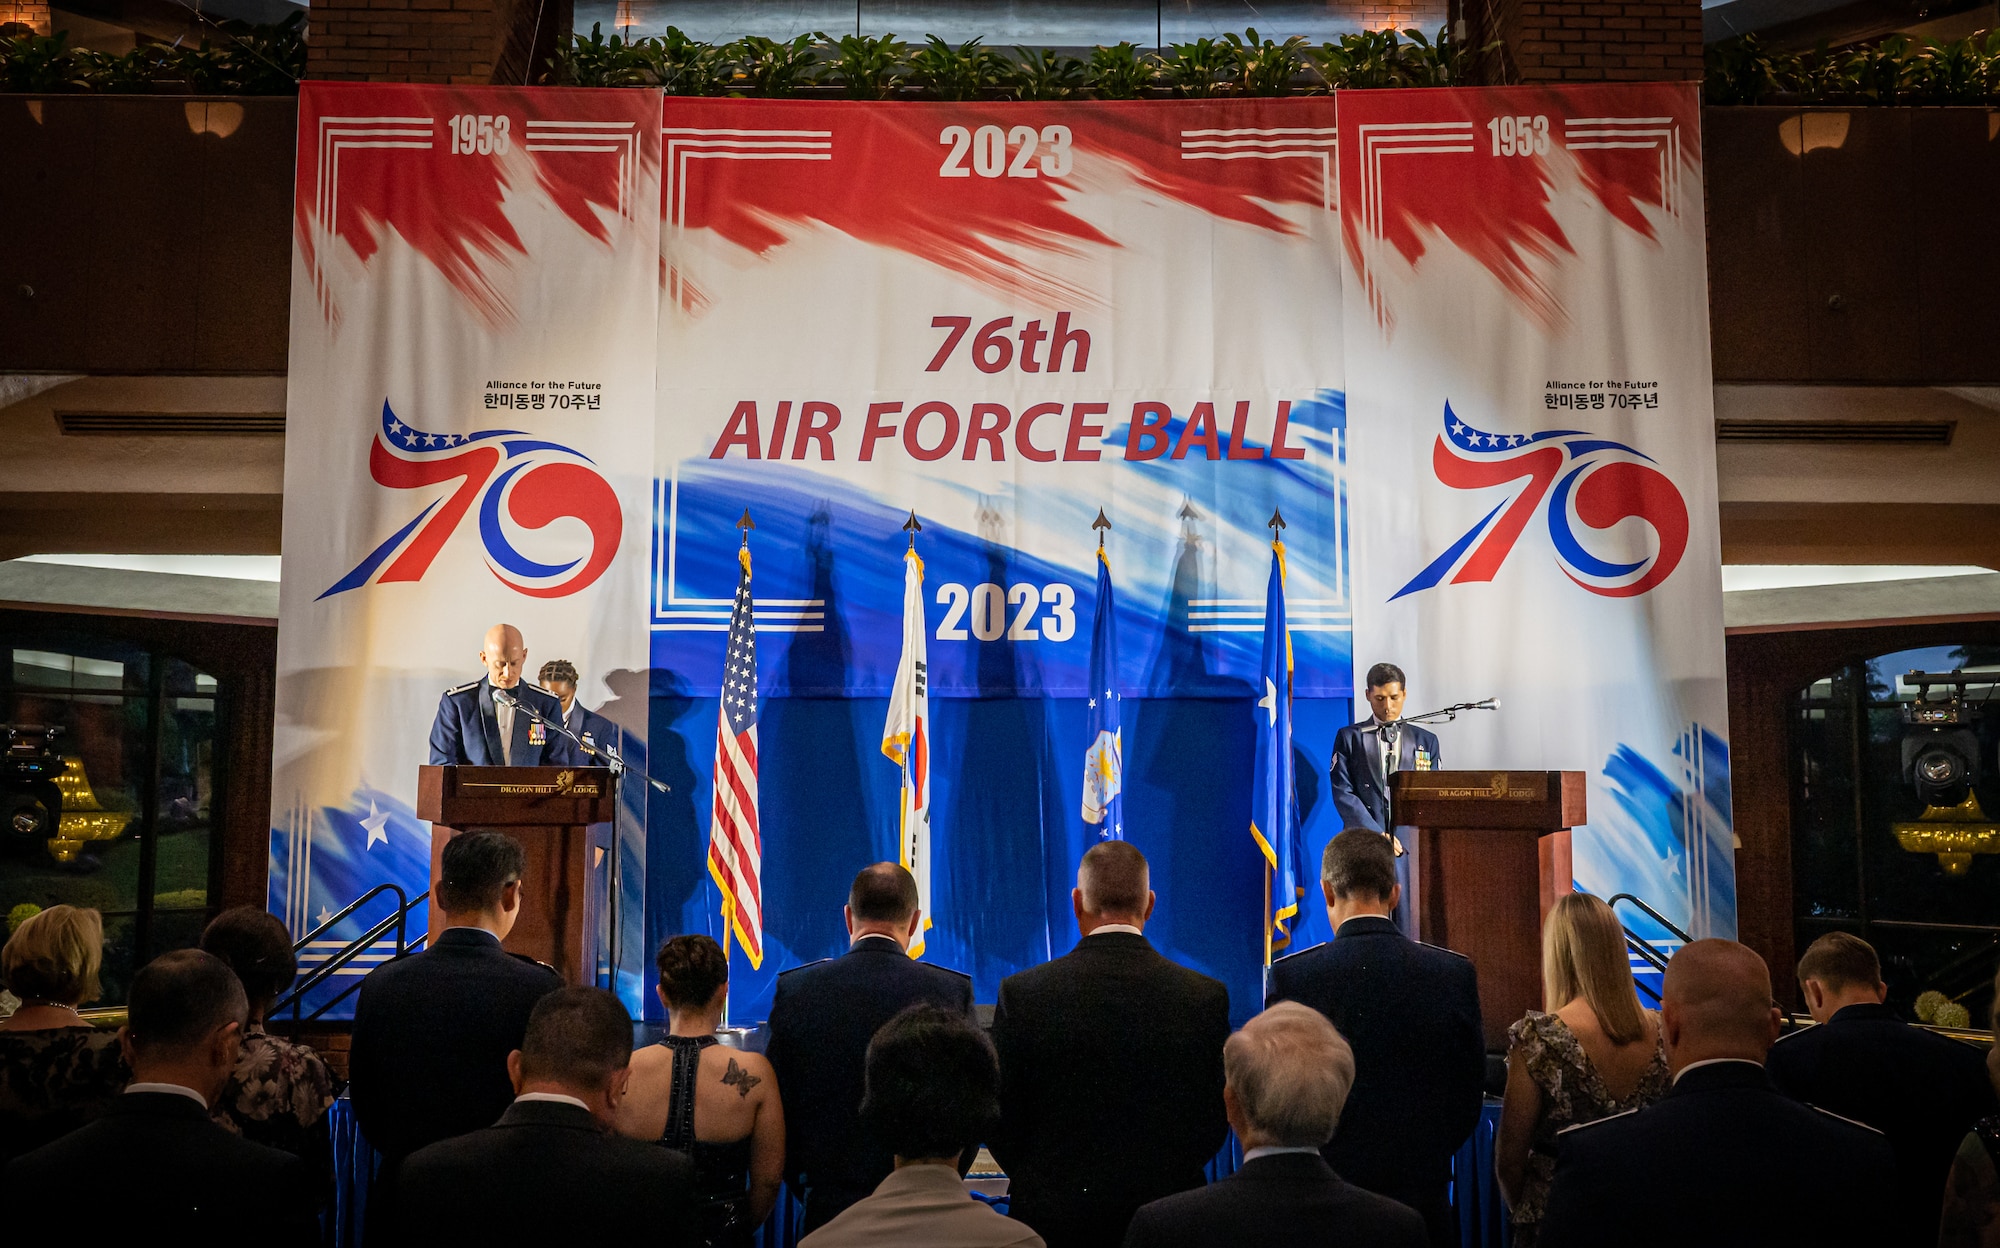 U.S. Air Force Capt. Peter Jackson, 51st Fighter Wing chaplain, offers the invocation during the 76th Air Force Ball at U.S. Army Garrison Yongsan, Republic of Korea, Sept. 23, 2023. The Air Force Ball is a formal event that commemorates the heritage and legacy of the Air Force since its inception on Sept. 18, 1947. (U.S. Air Force photo by Staff Sgt. Kelsea Caballero)